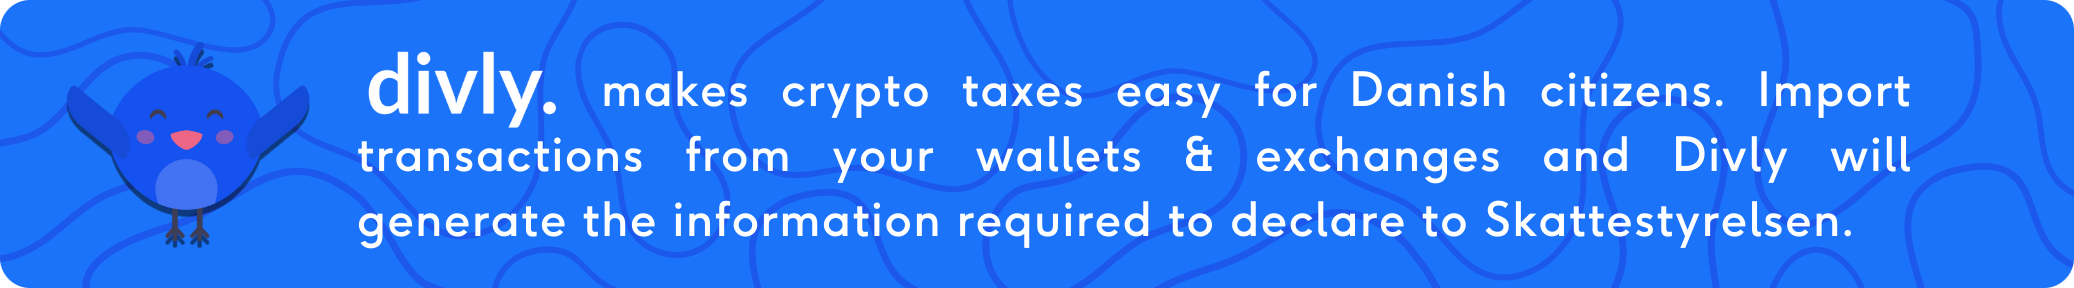 Divly makes crypto taxes easy for Danish citizens. Import transactions from your wallets & exchanges and Divly will generate the information required to declare to Skattestryelsen